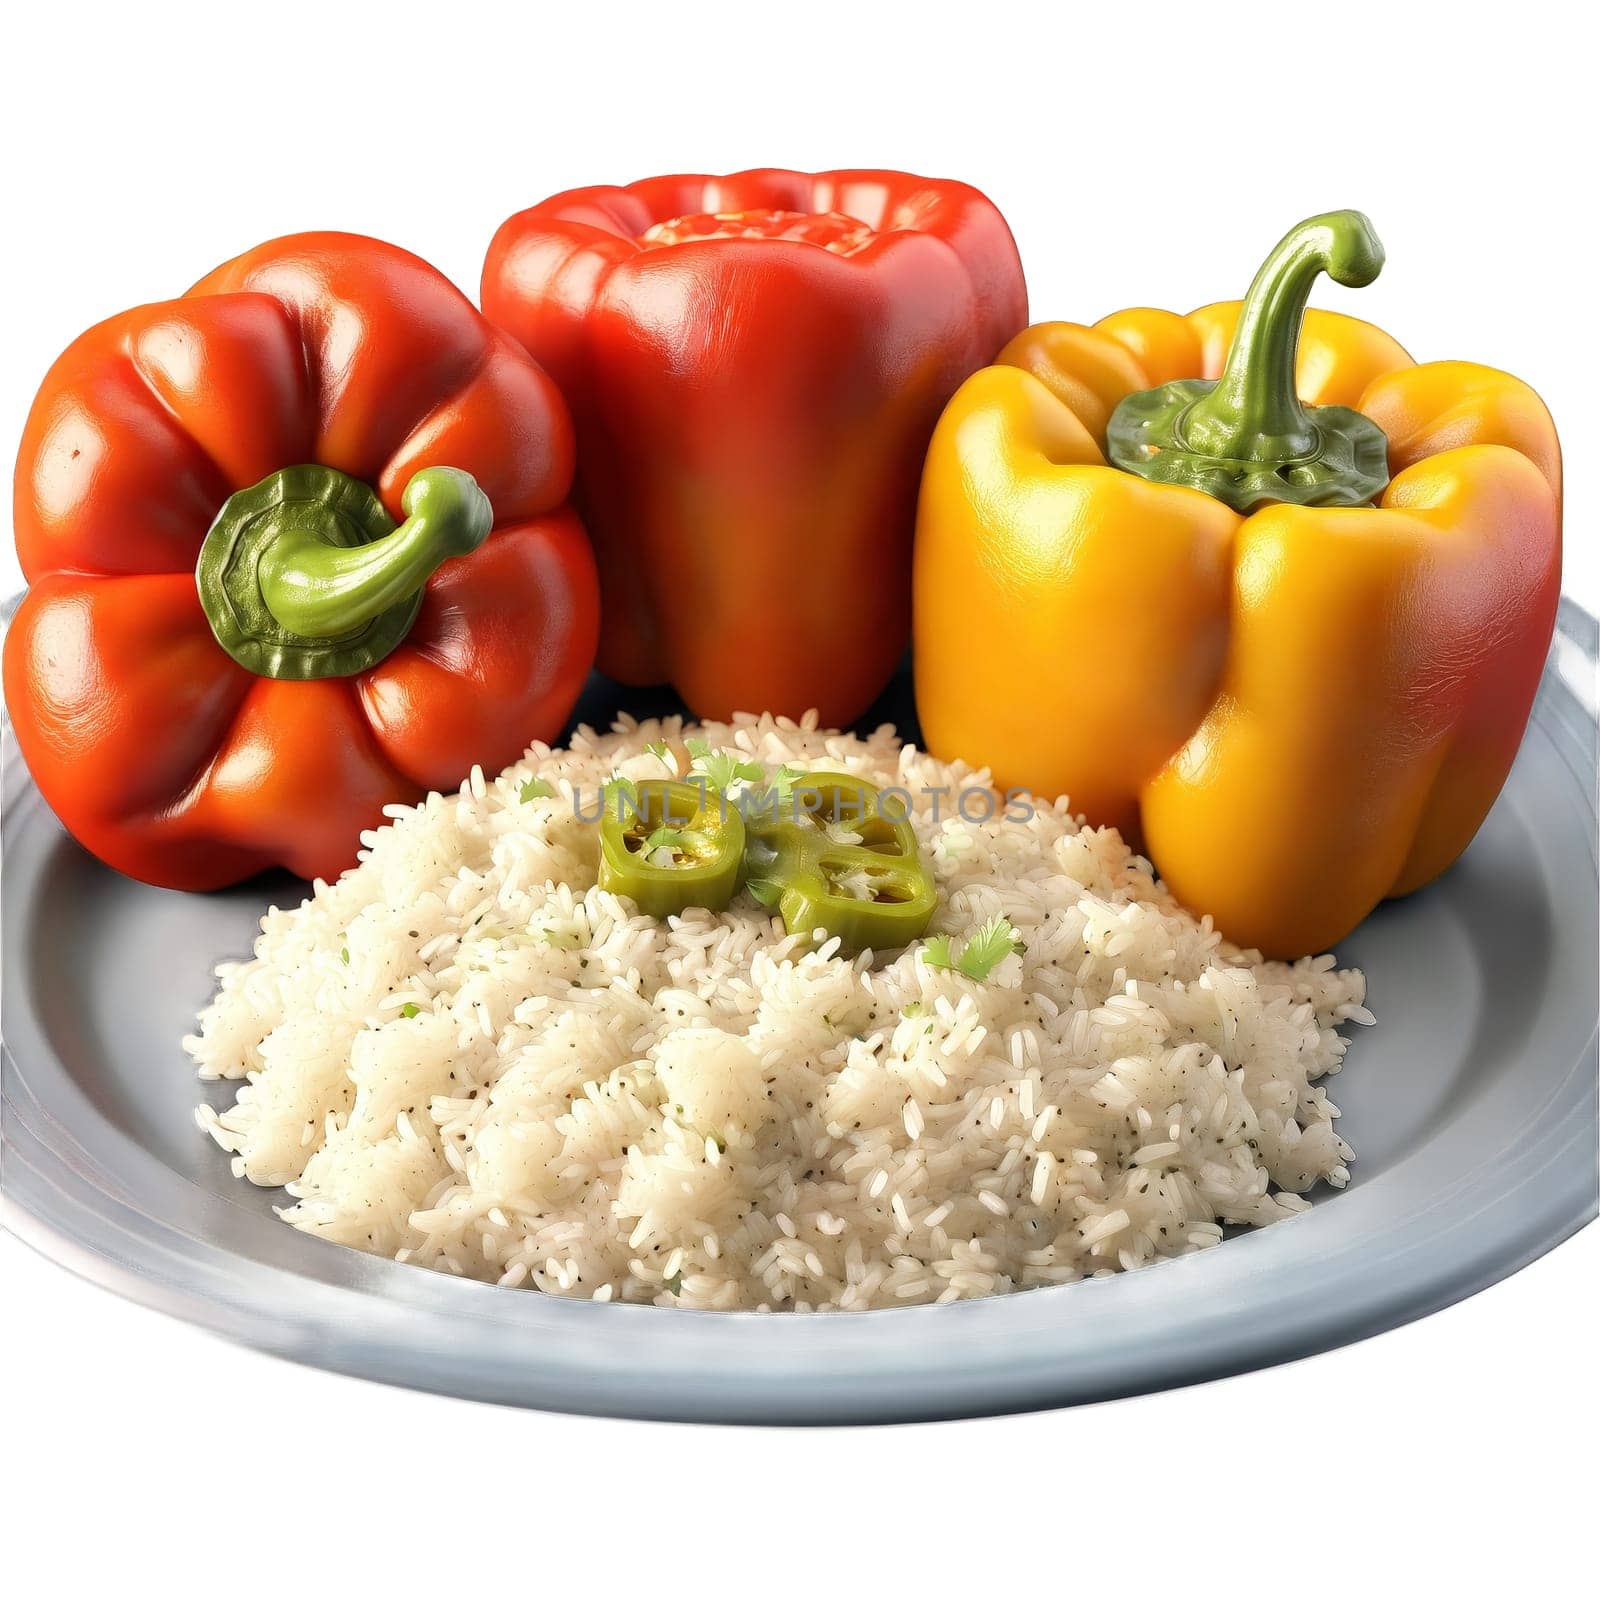 Stuffed Peppers with bell peppers ground beef rice and tomato sauce spinning with steam rising by panophotograph